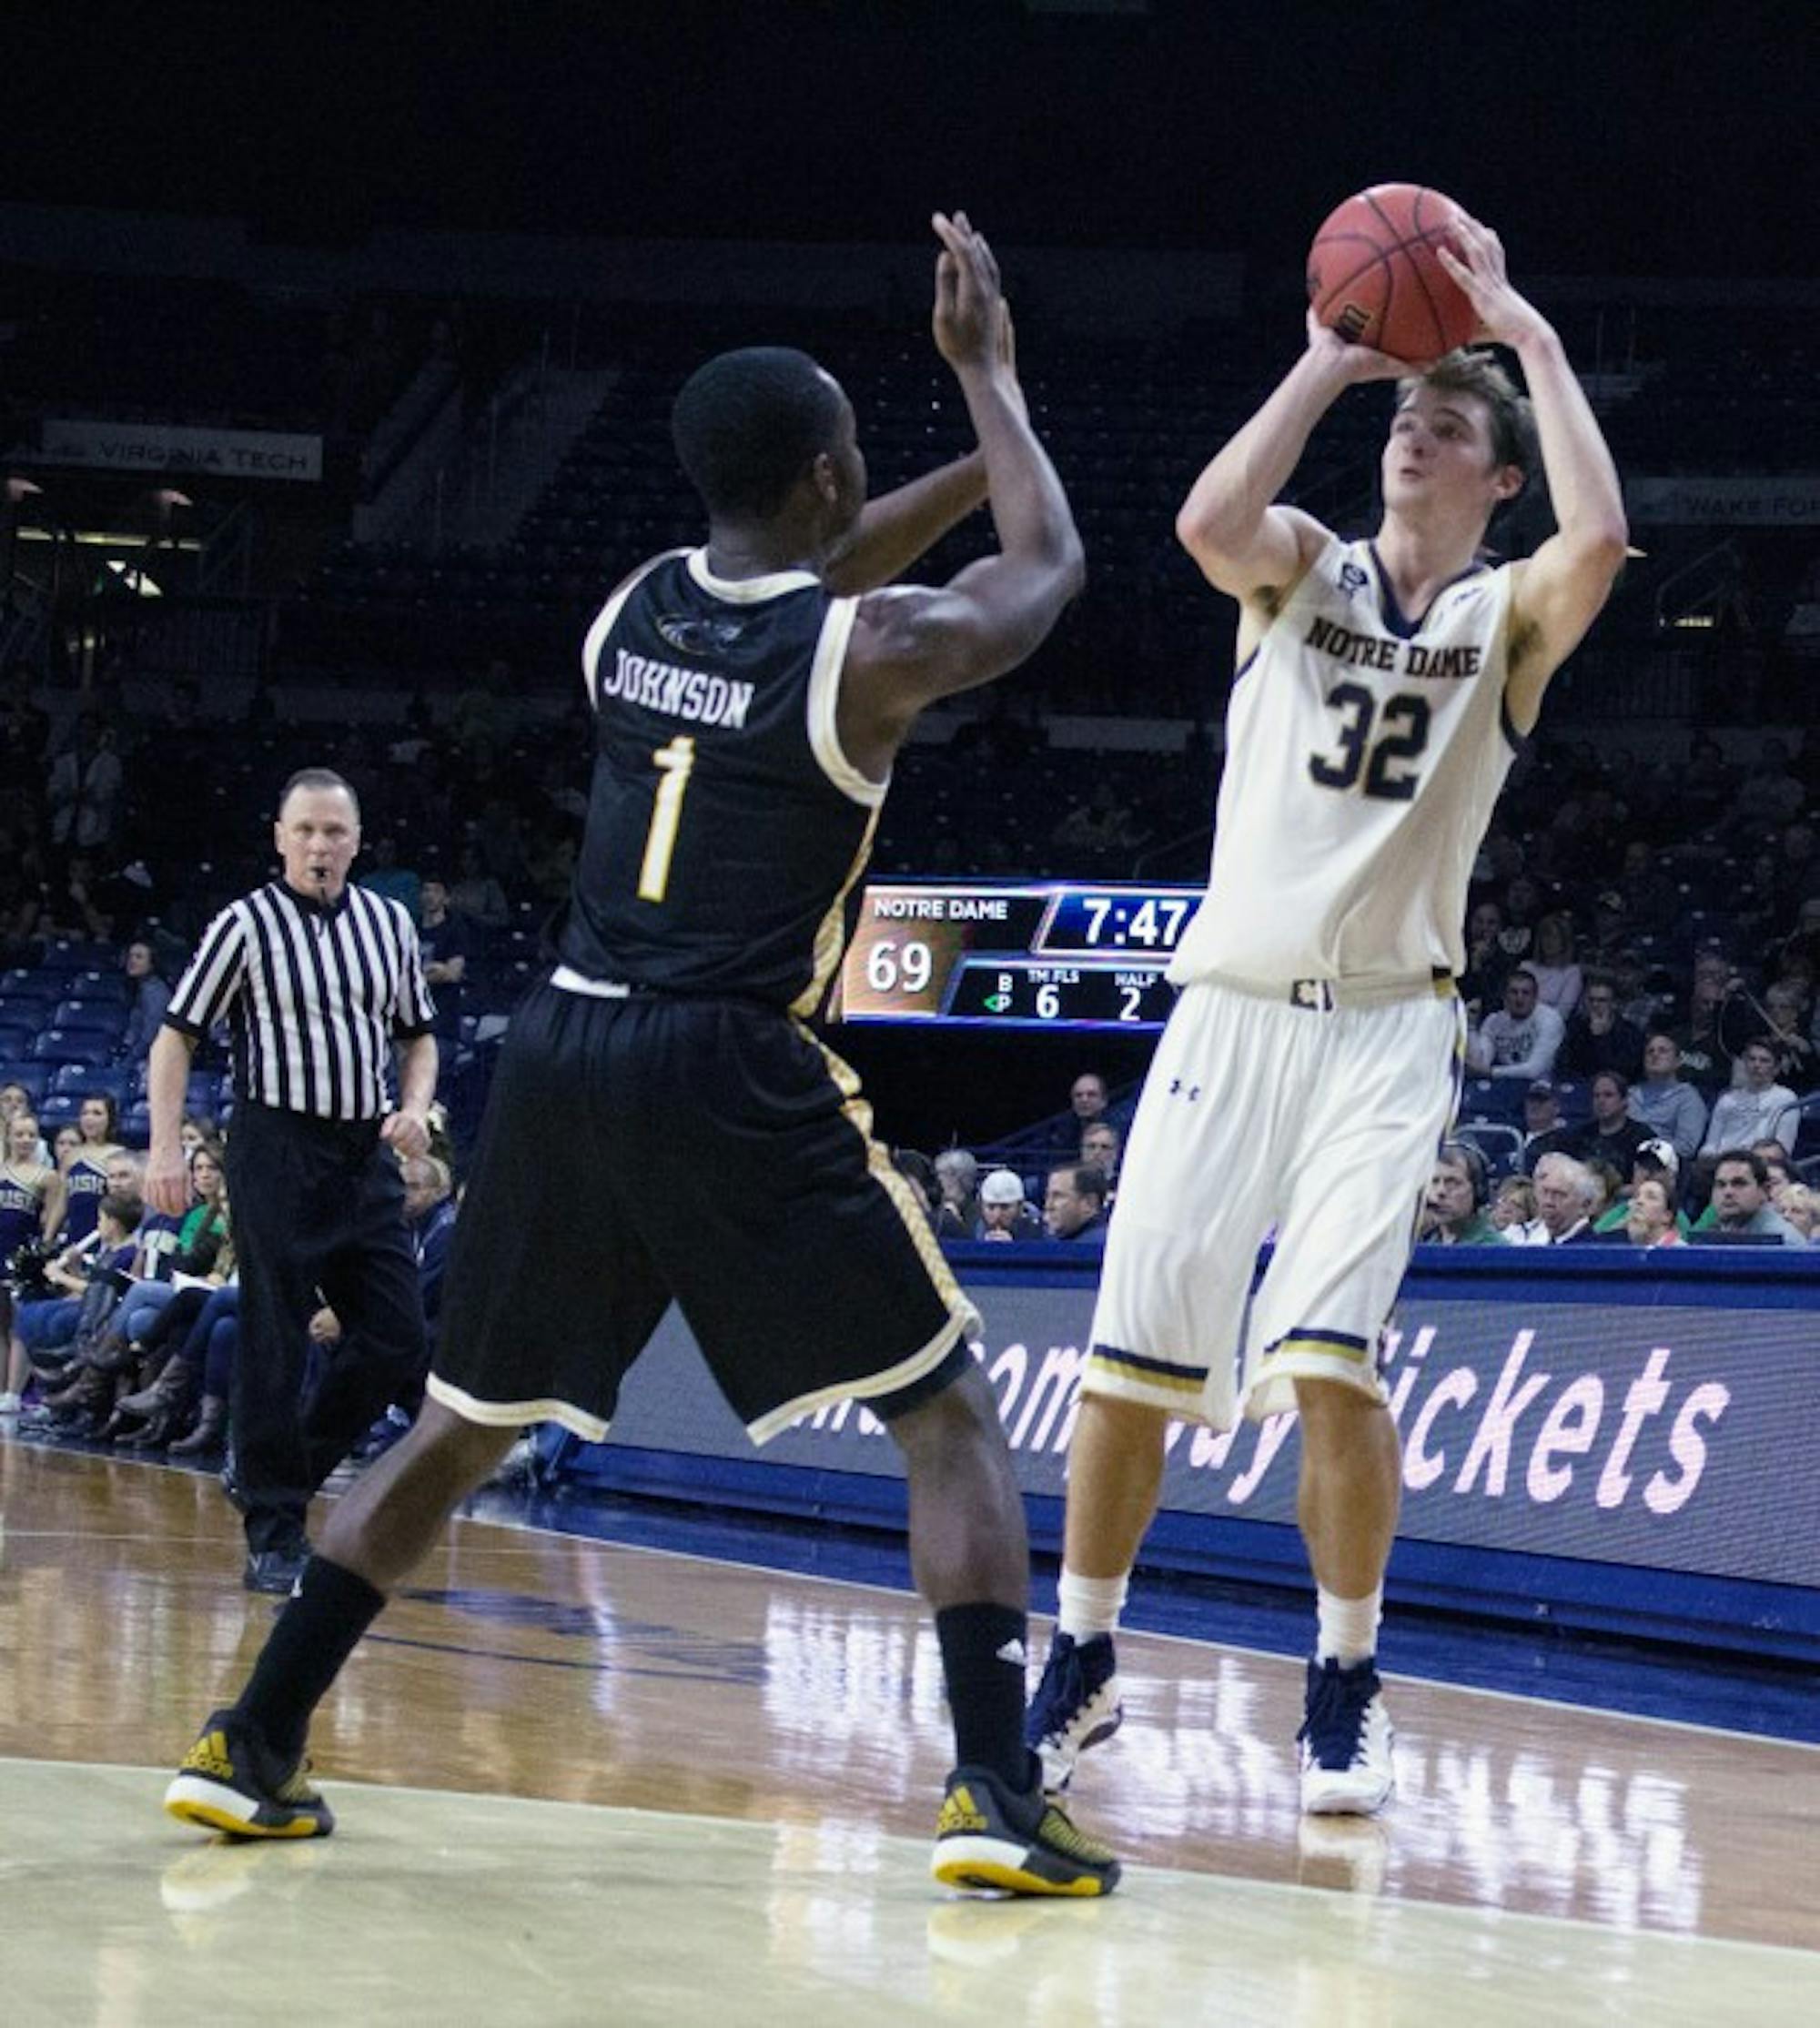 Irish junior guard Steve Vasturia takes a shot during Notre Dame’s 86-78 win over Milwaukee on Nov. 17 at Purcell Pavilion.